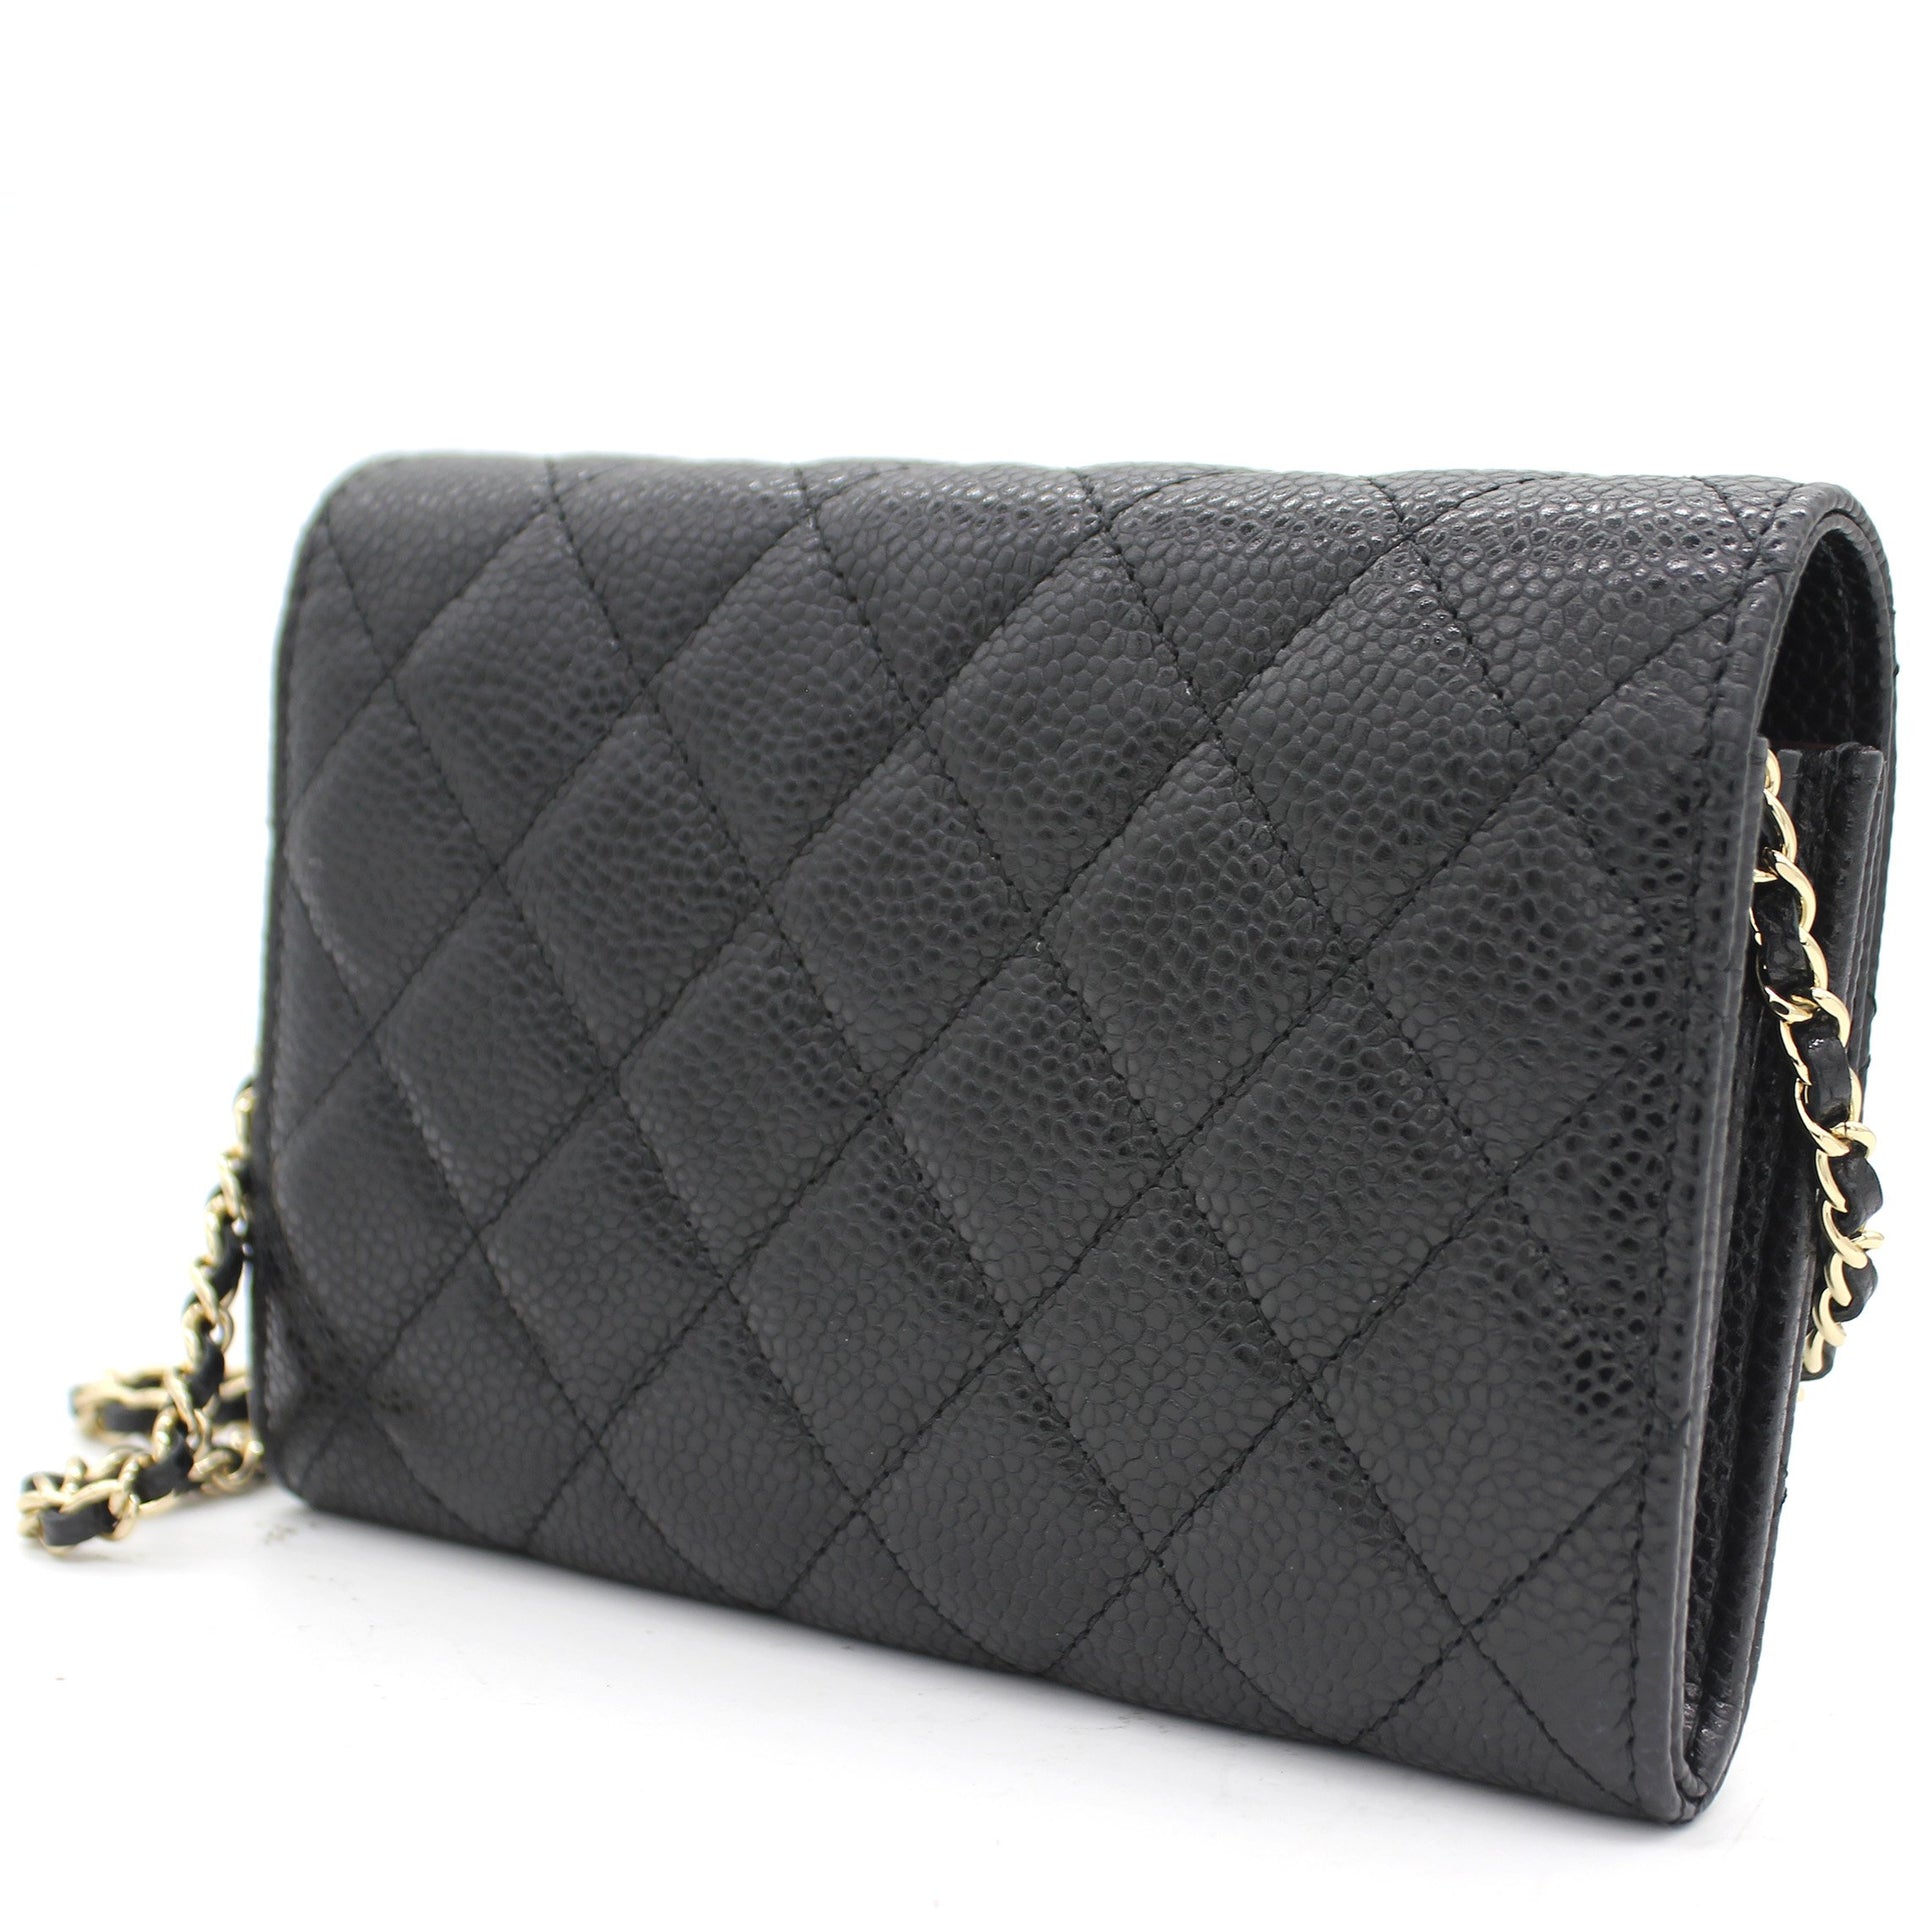 Chanel Quilted Leather Mini WOC Chain Clutch Bag Black Caviar